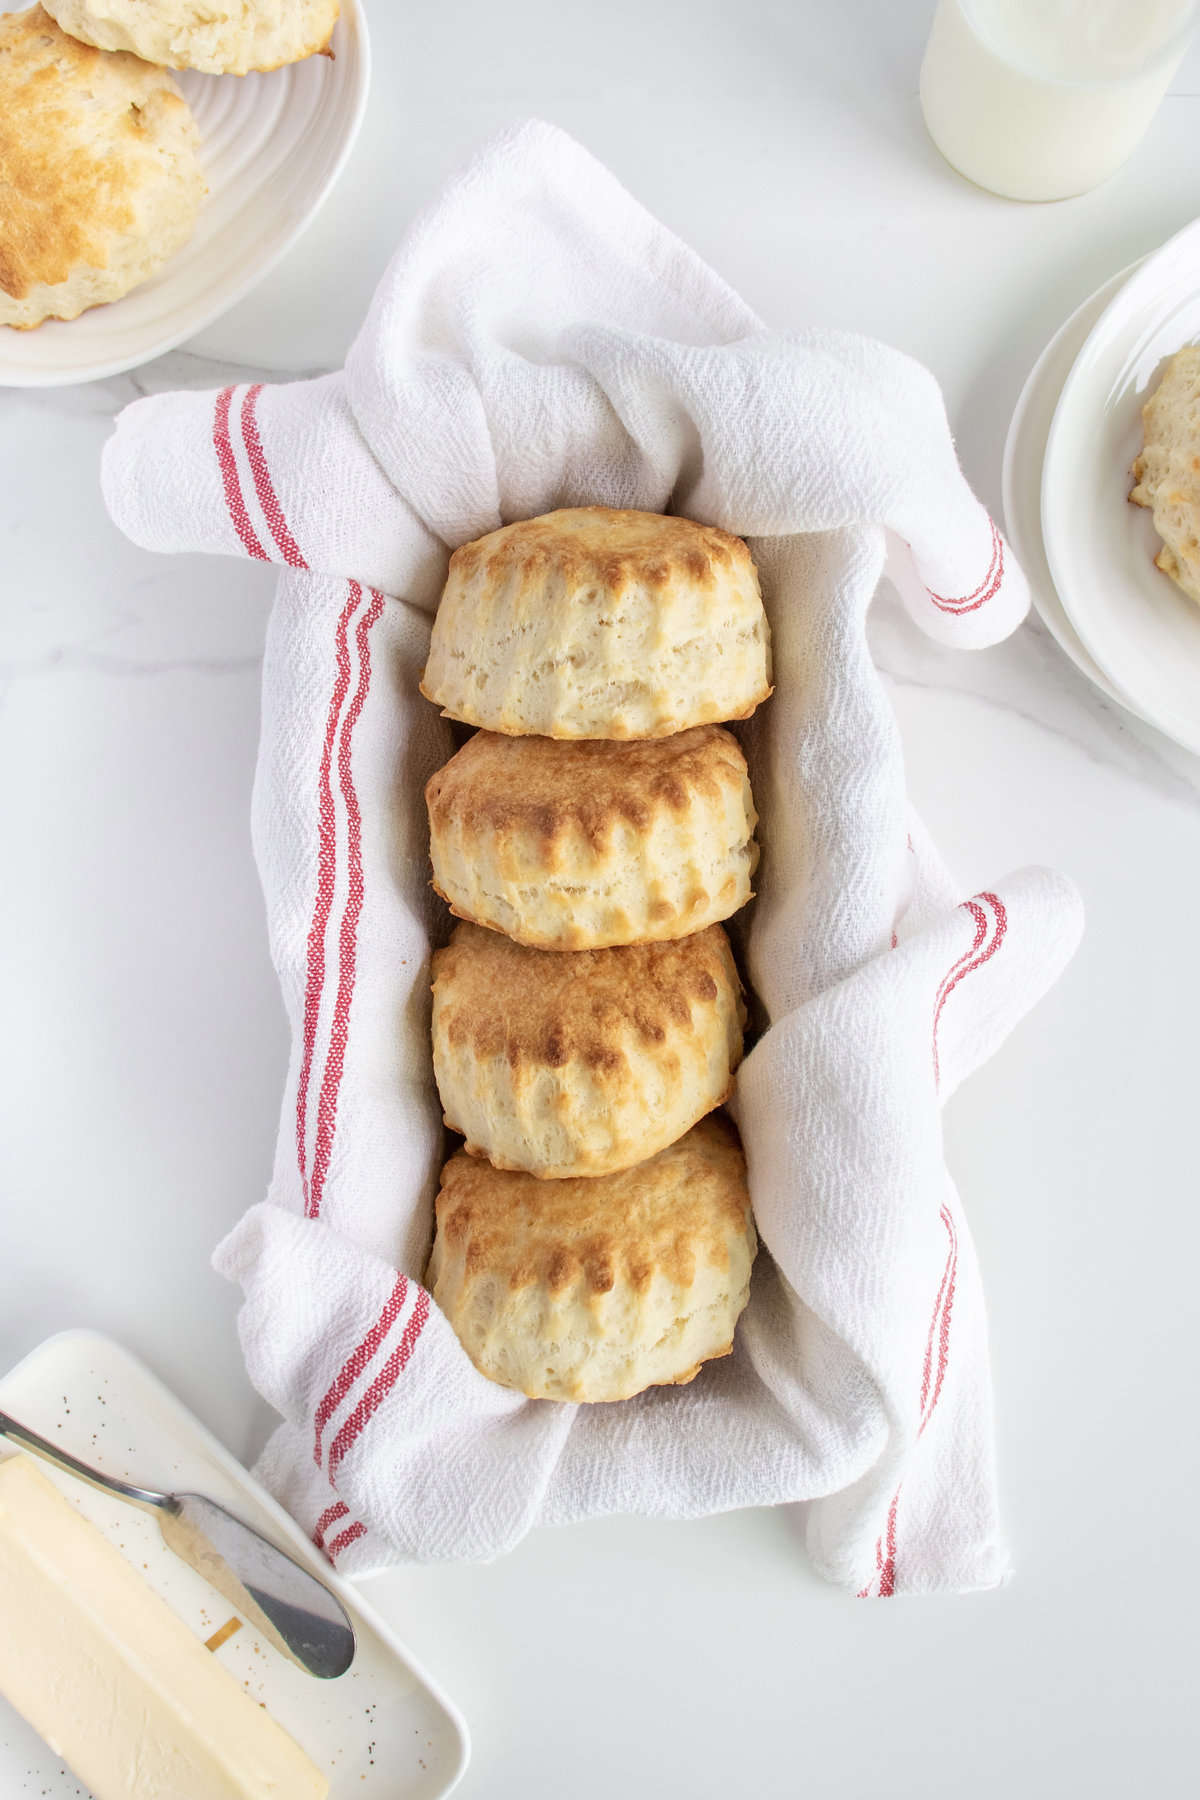 Four buttermilk biscuits in a rectangular serving dish lined with a white tea towel.